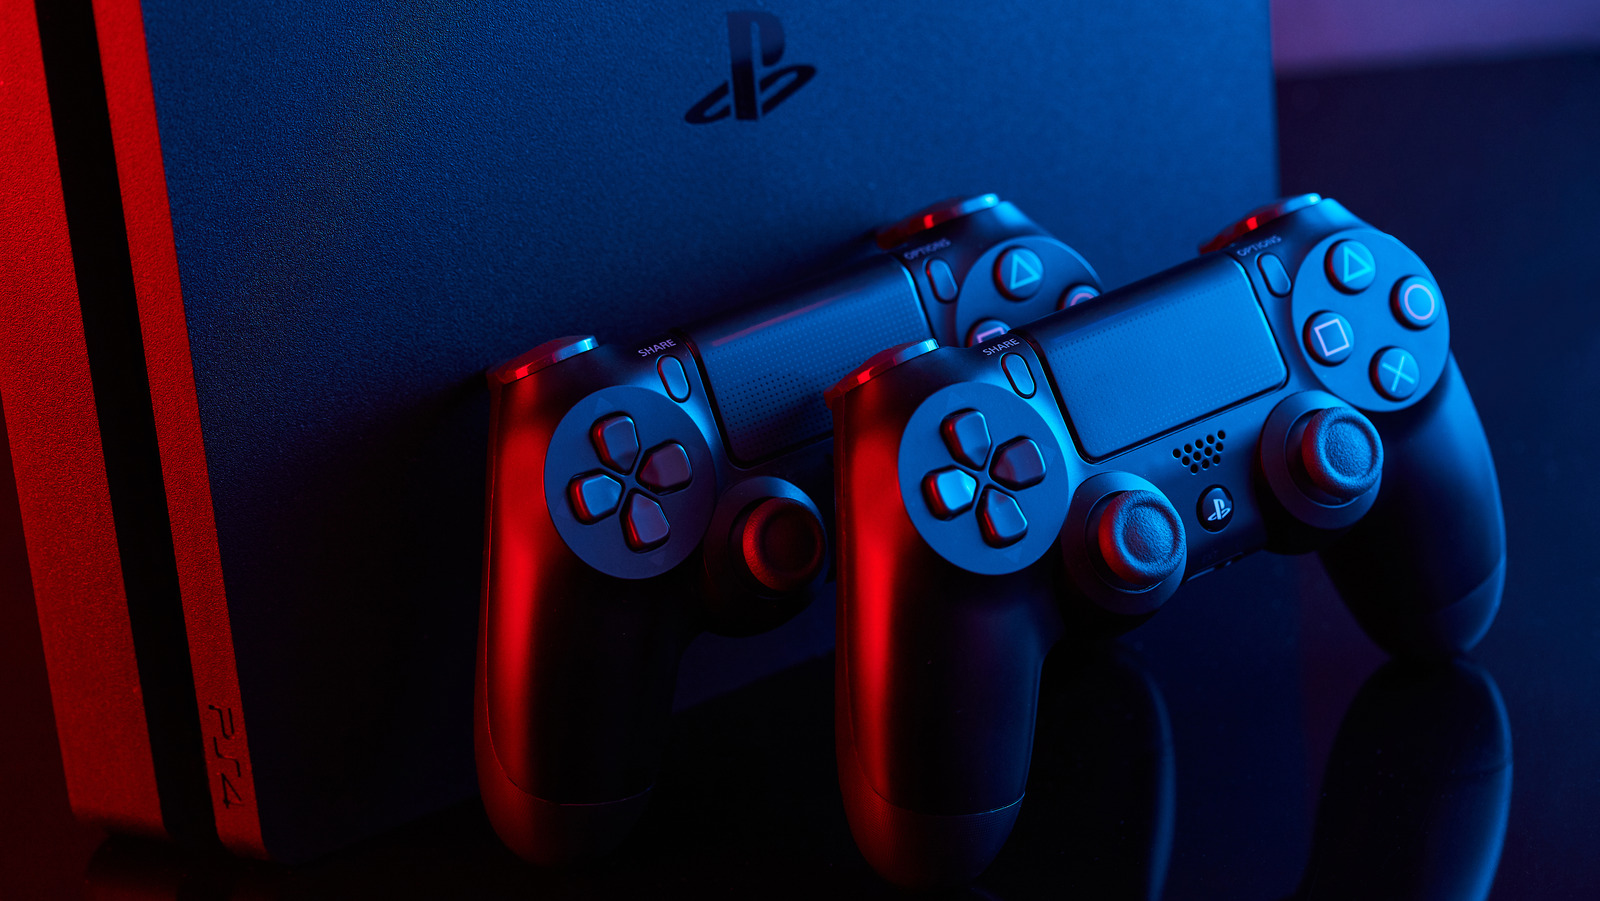 How to set up Playstation 4: Connecting controller and more tips